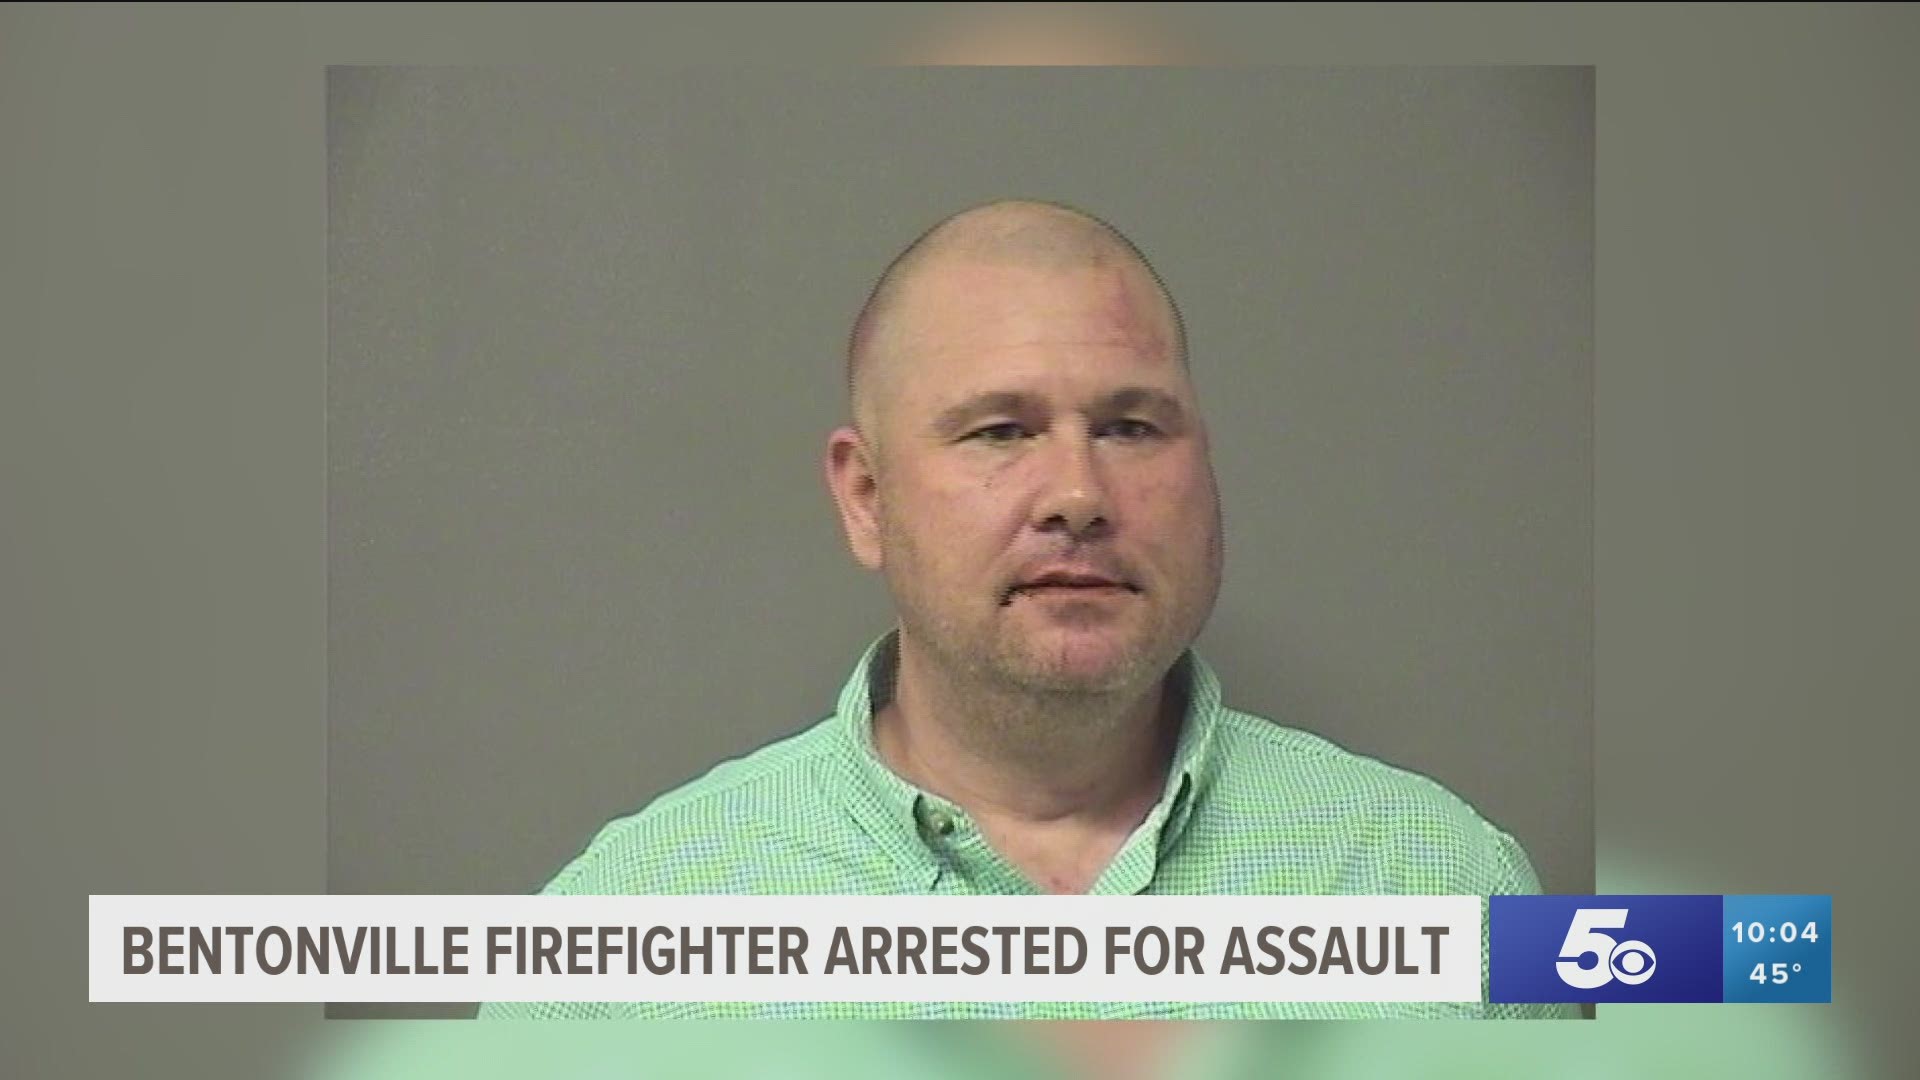 The Bentonville fire captain admitted to police he confronted the victim about not being American.